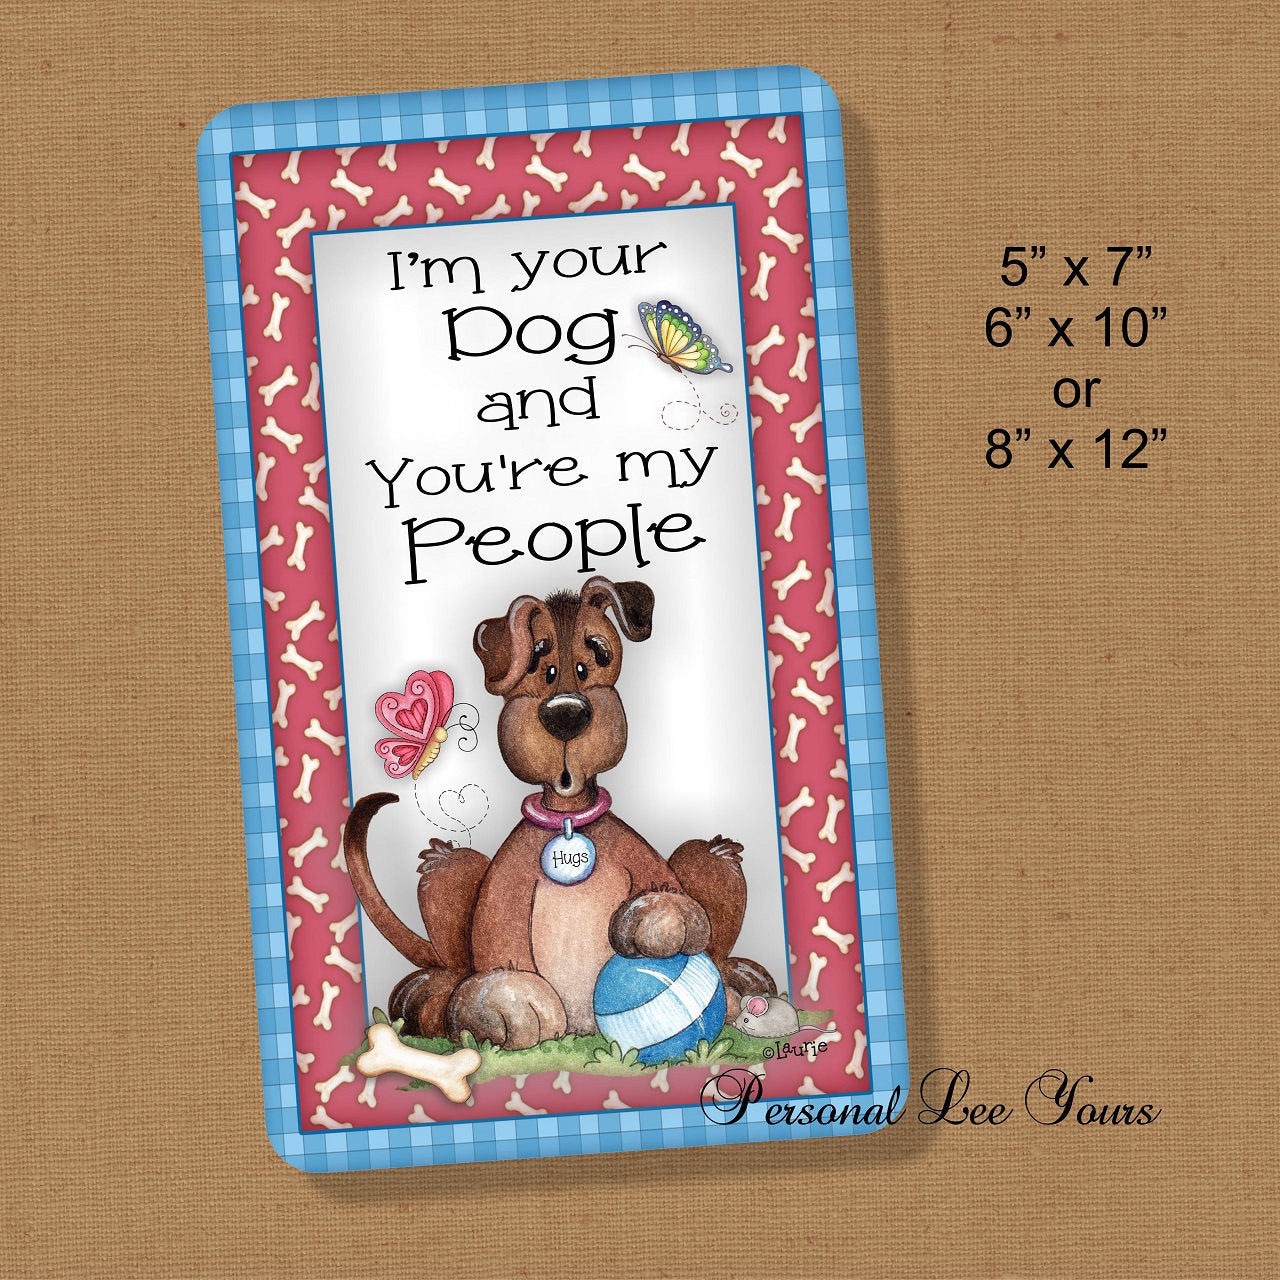 Metal Wreath Sign * I'm Your Dog * 3 Sizes * Lightweight